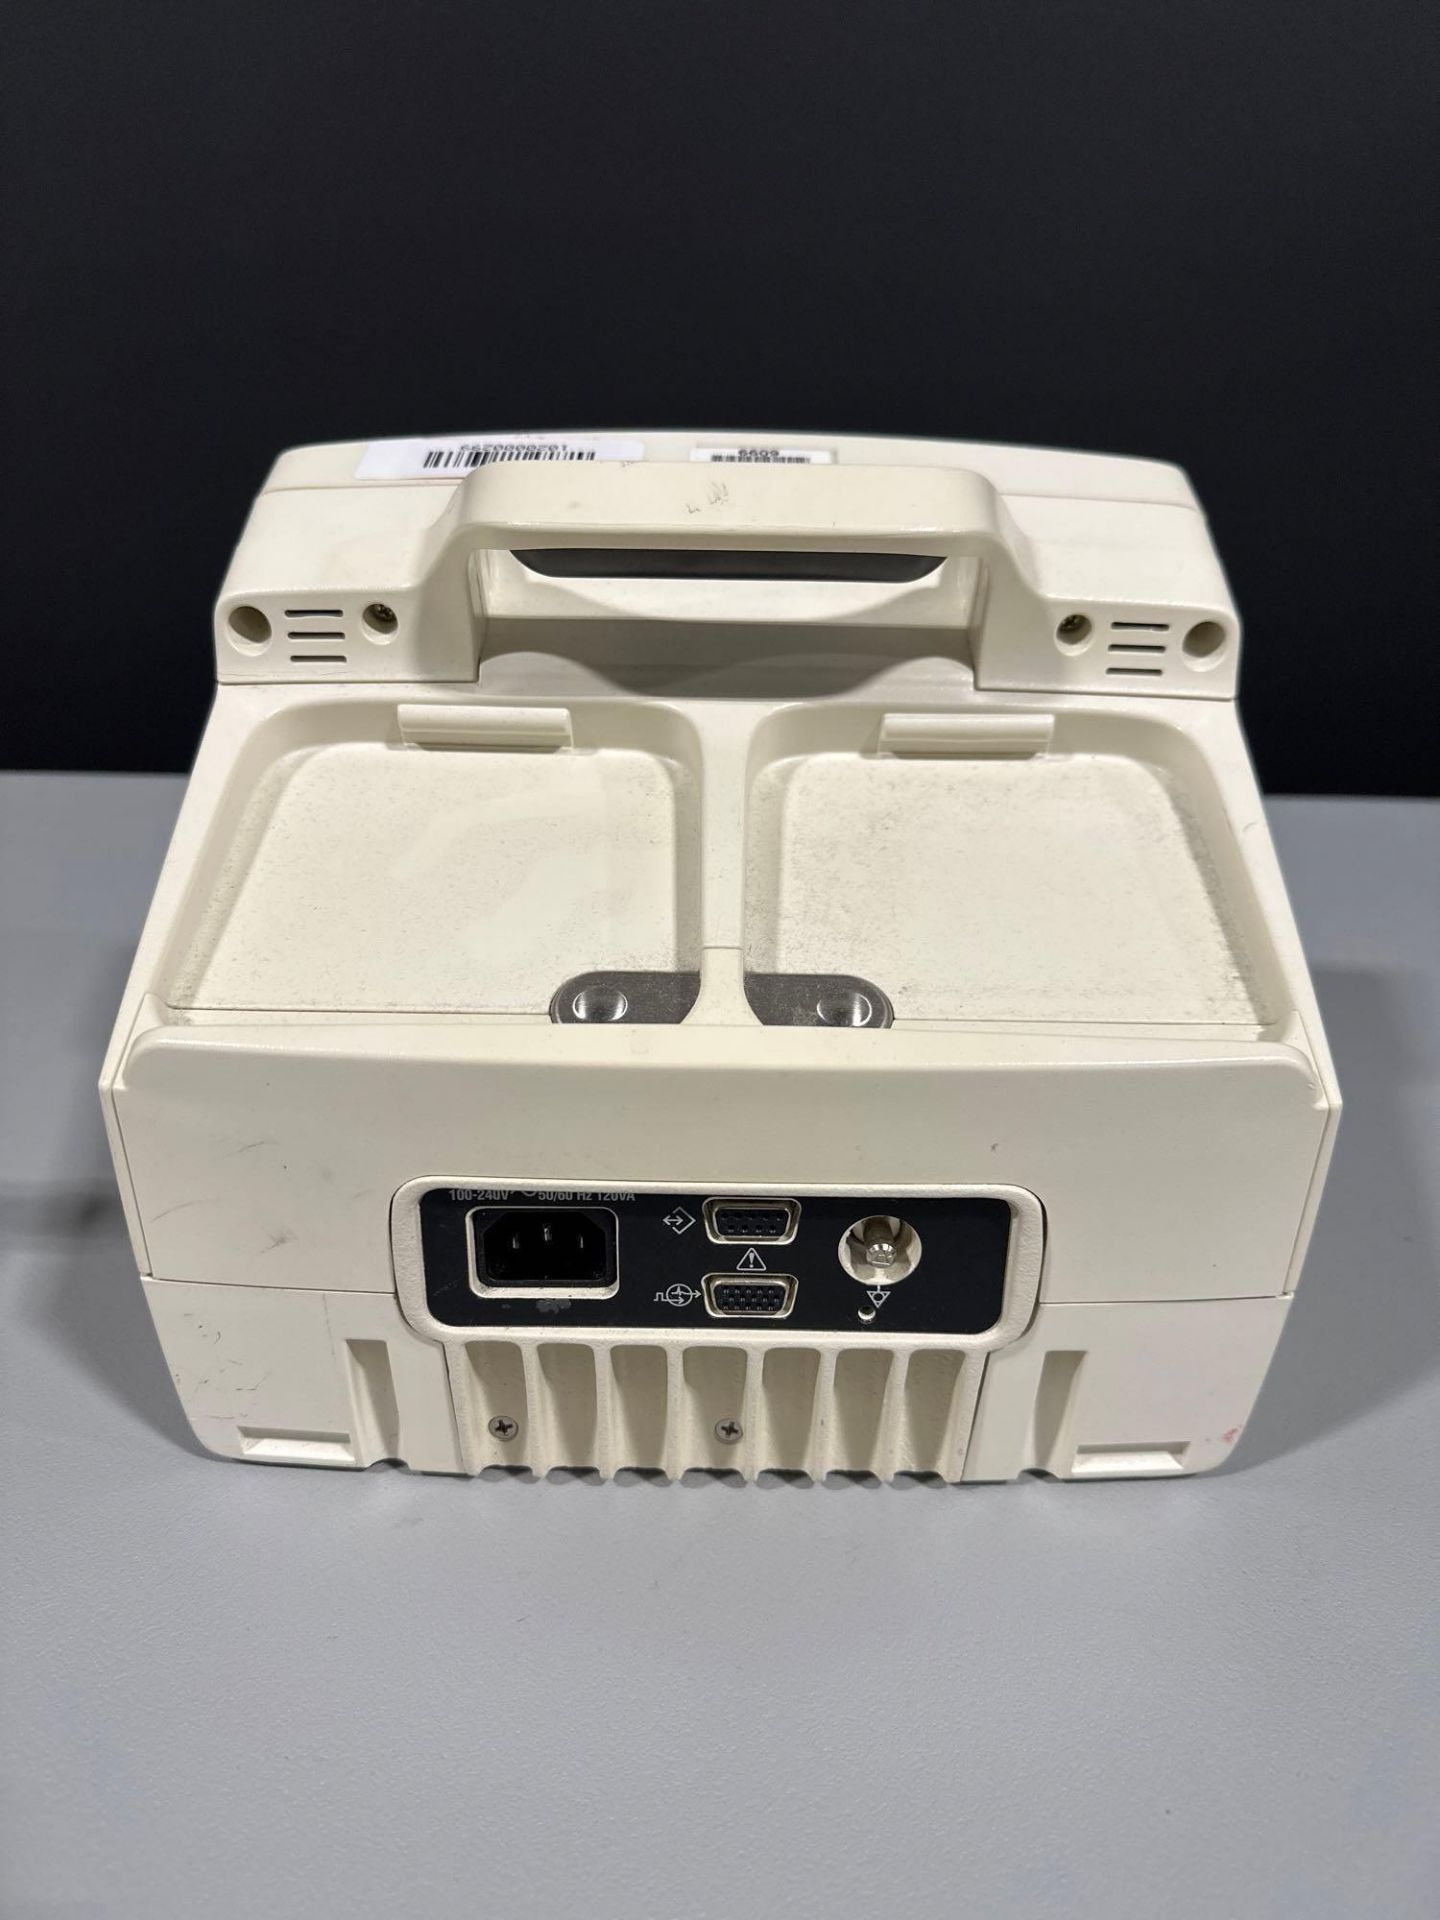 MEDTRONIC/PHYSIO CONTROL LIFEPAK 20E DEFIB WITH PACING, 3 LEAD ECG, ANALYZE (AED MODE) - Image 8 of 8